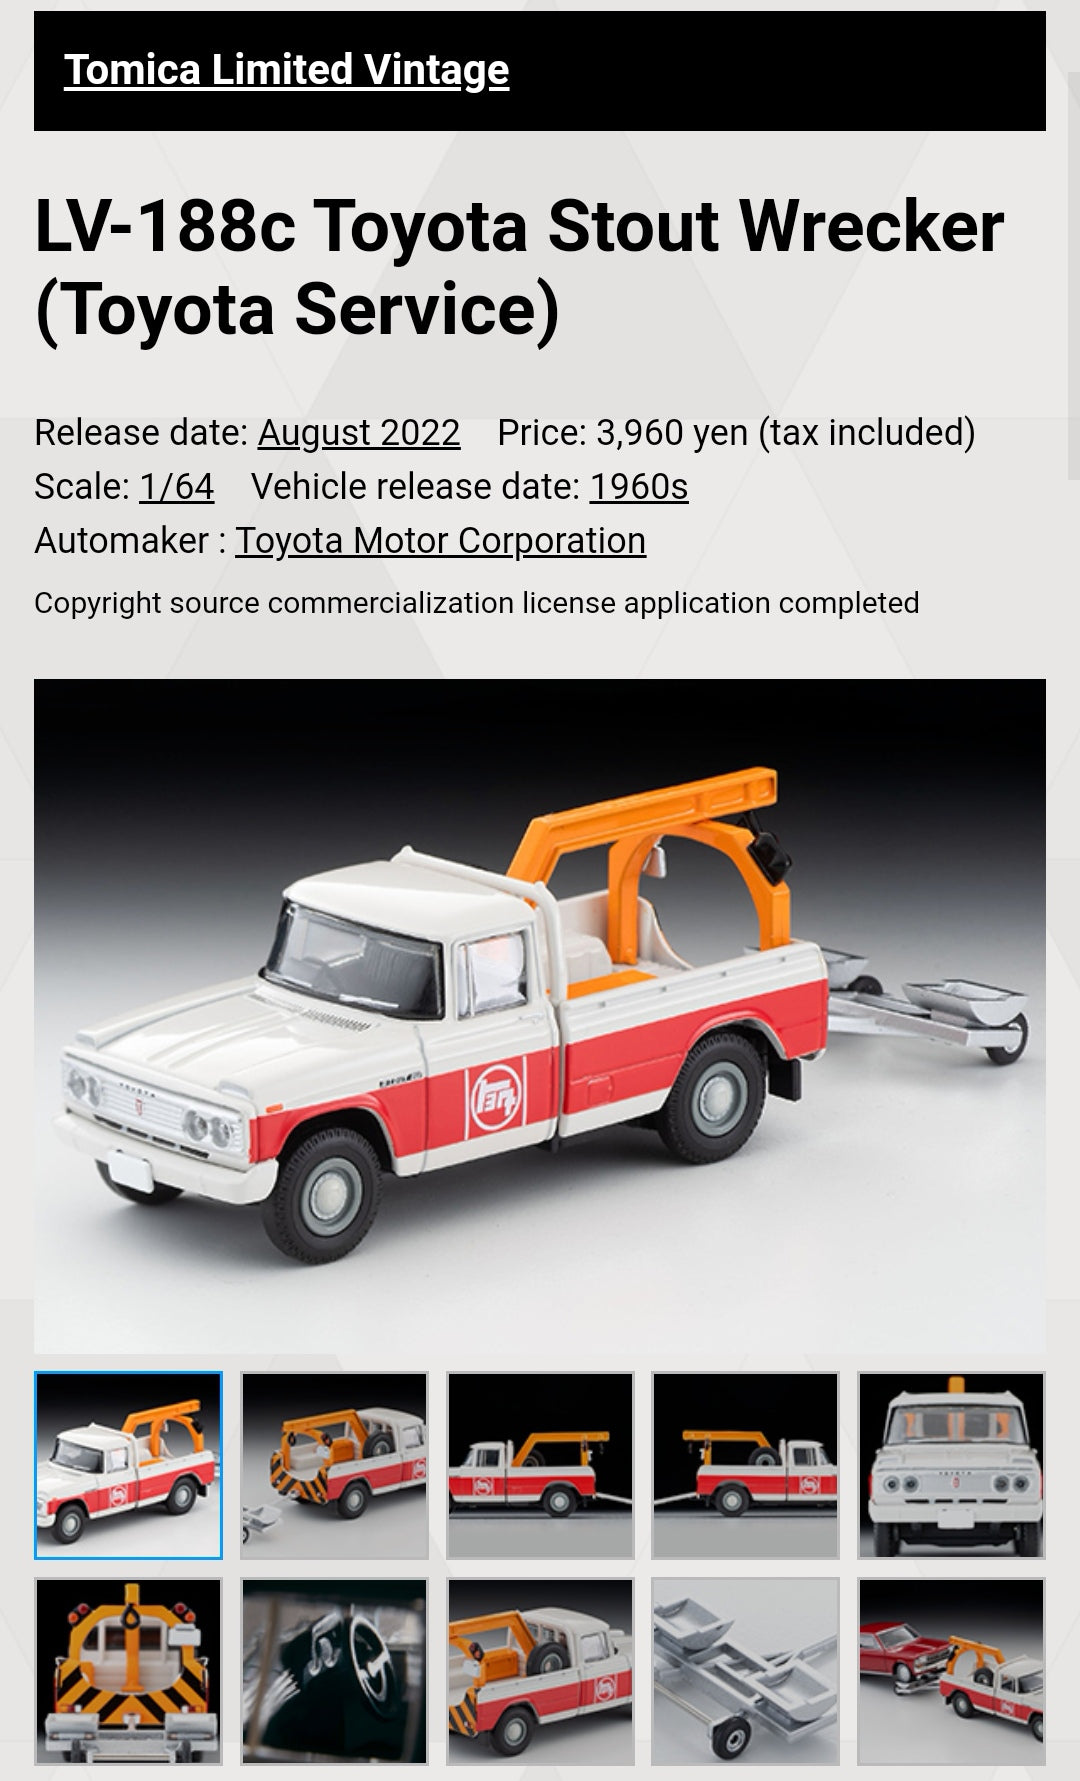 Tomica Limited Vintage LV-188c Toyota Stout Wrecker (Toyota Service)